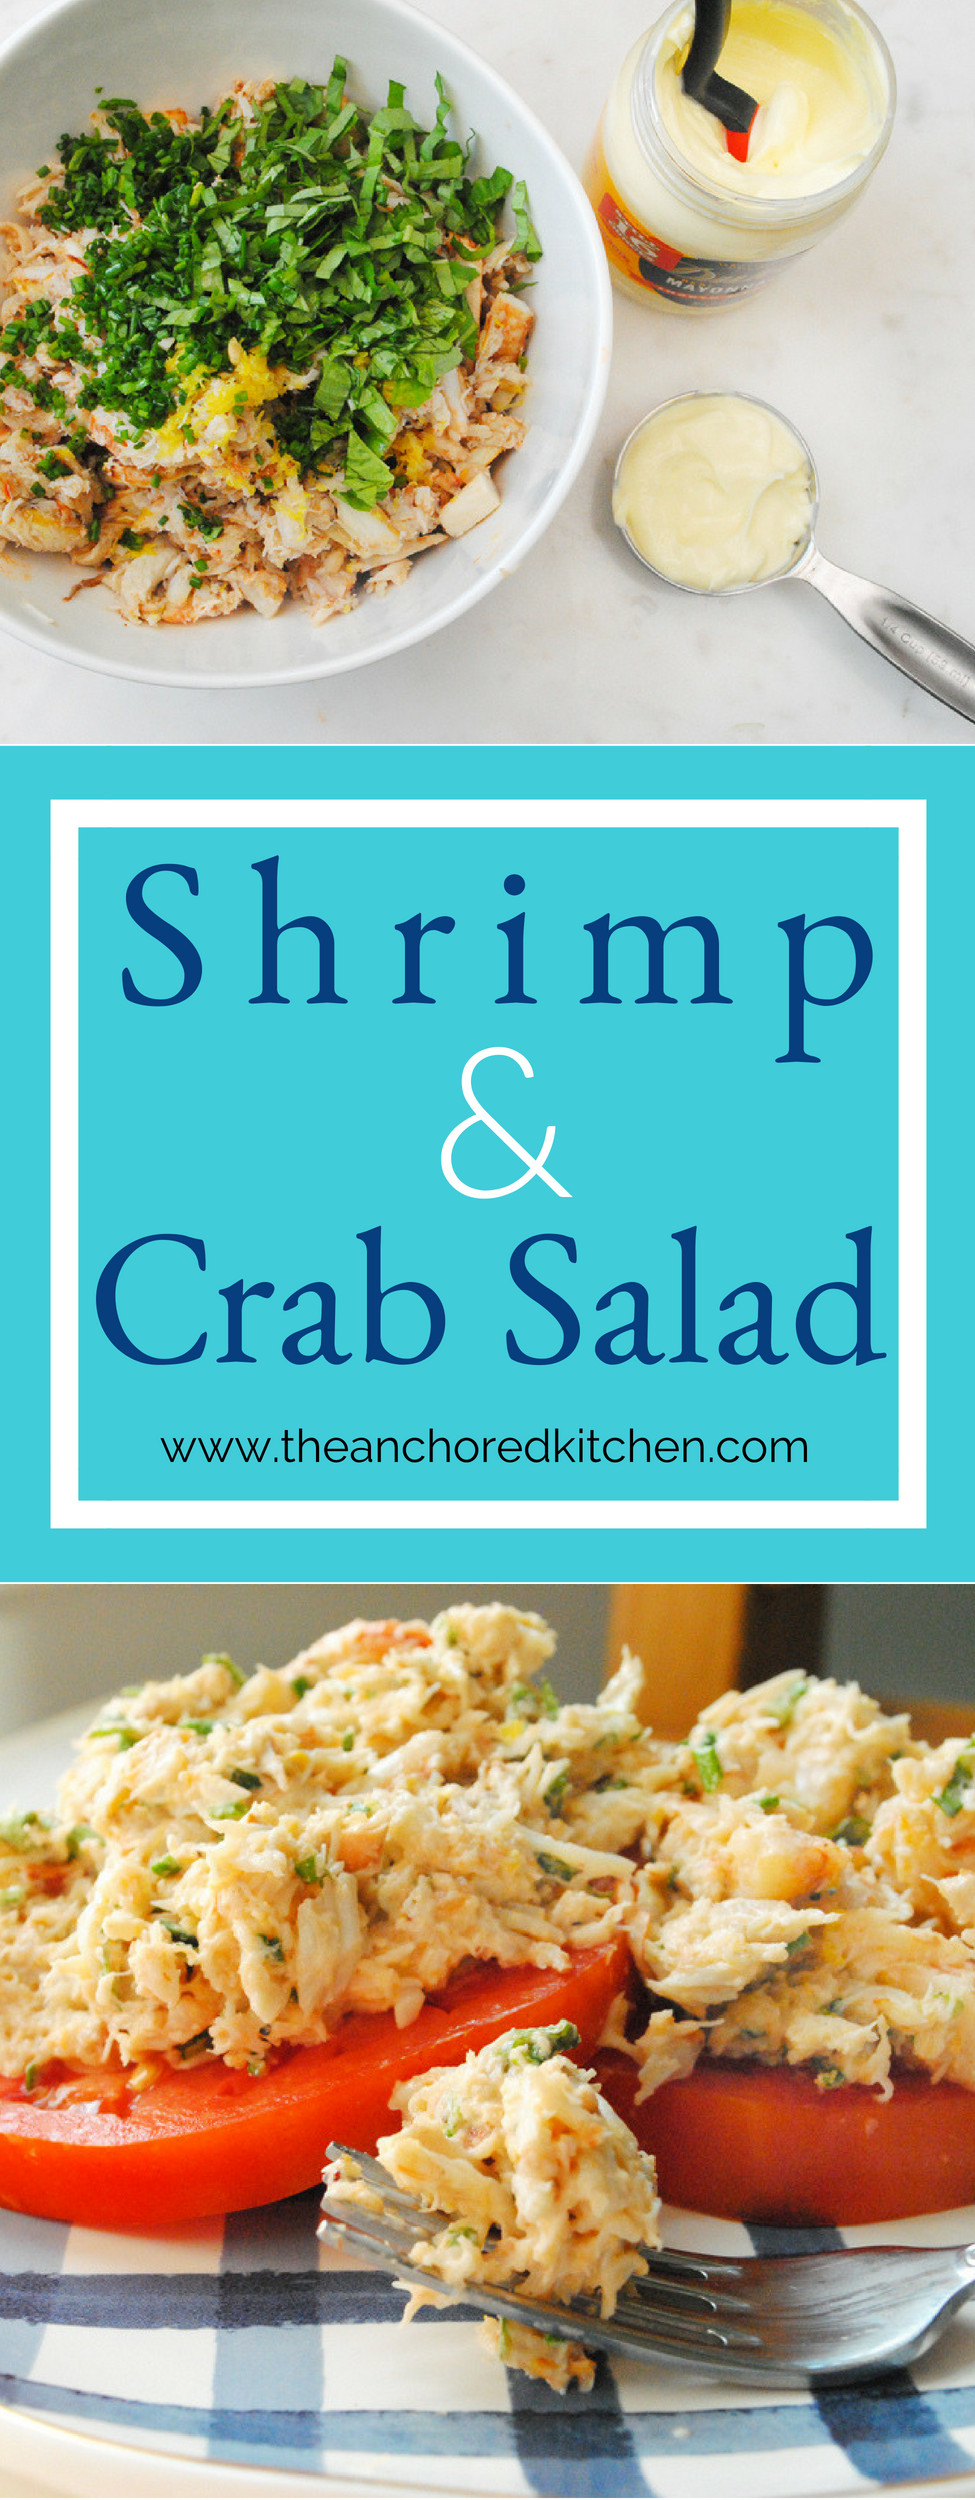 Seafood Salad Recipe With Crabmeat And Shrimp
 Shrimp and Crab Salad Recipe